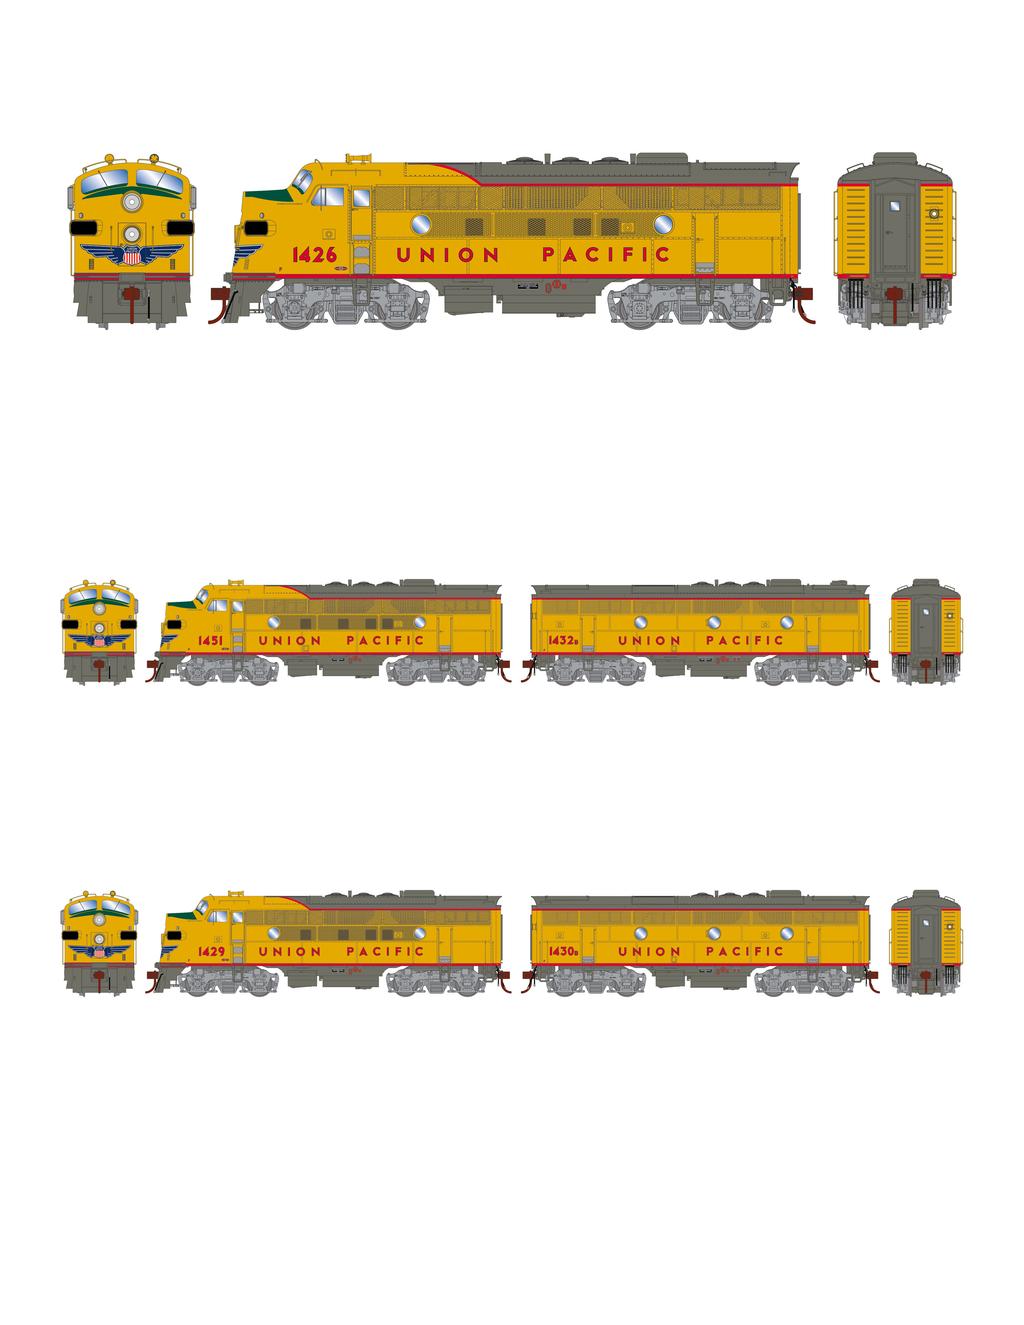 Union Pacific ATHG22753 ATHG22853 HO F3A, UP/Freight #1426 HO F3A w/dcc & Sound, UP/Freight #1426 ATHG22754 HO F3A/F3B, UP/Passenger #1451/#1432B ATHG22755 HO F3A/F3B, UP/Freight #1429/#1430B